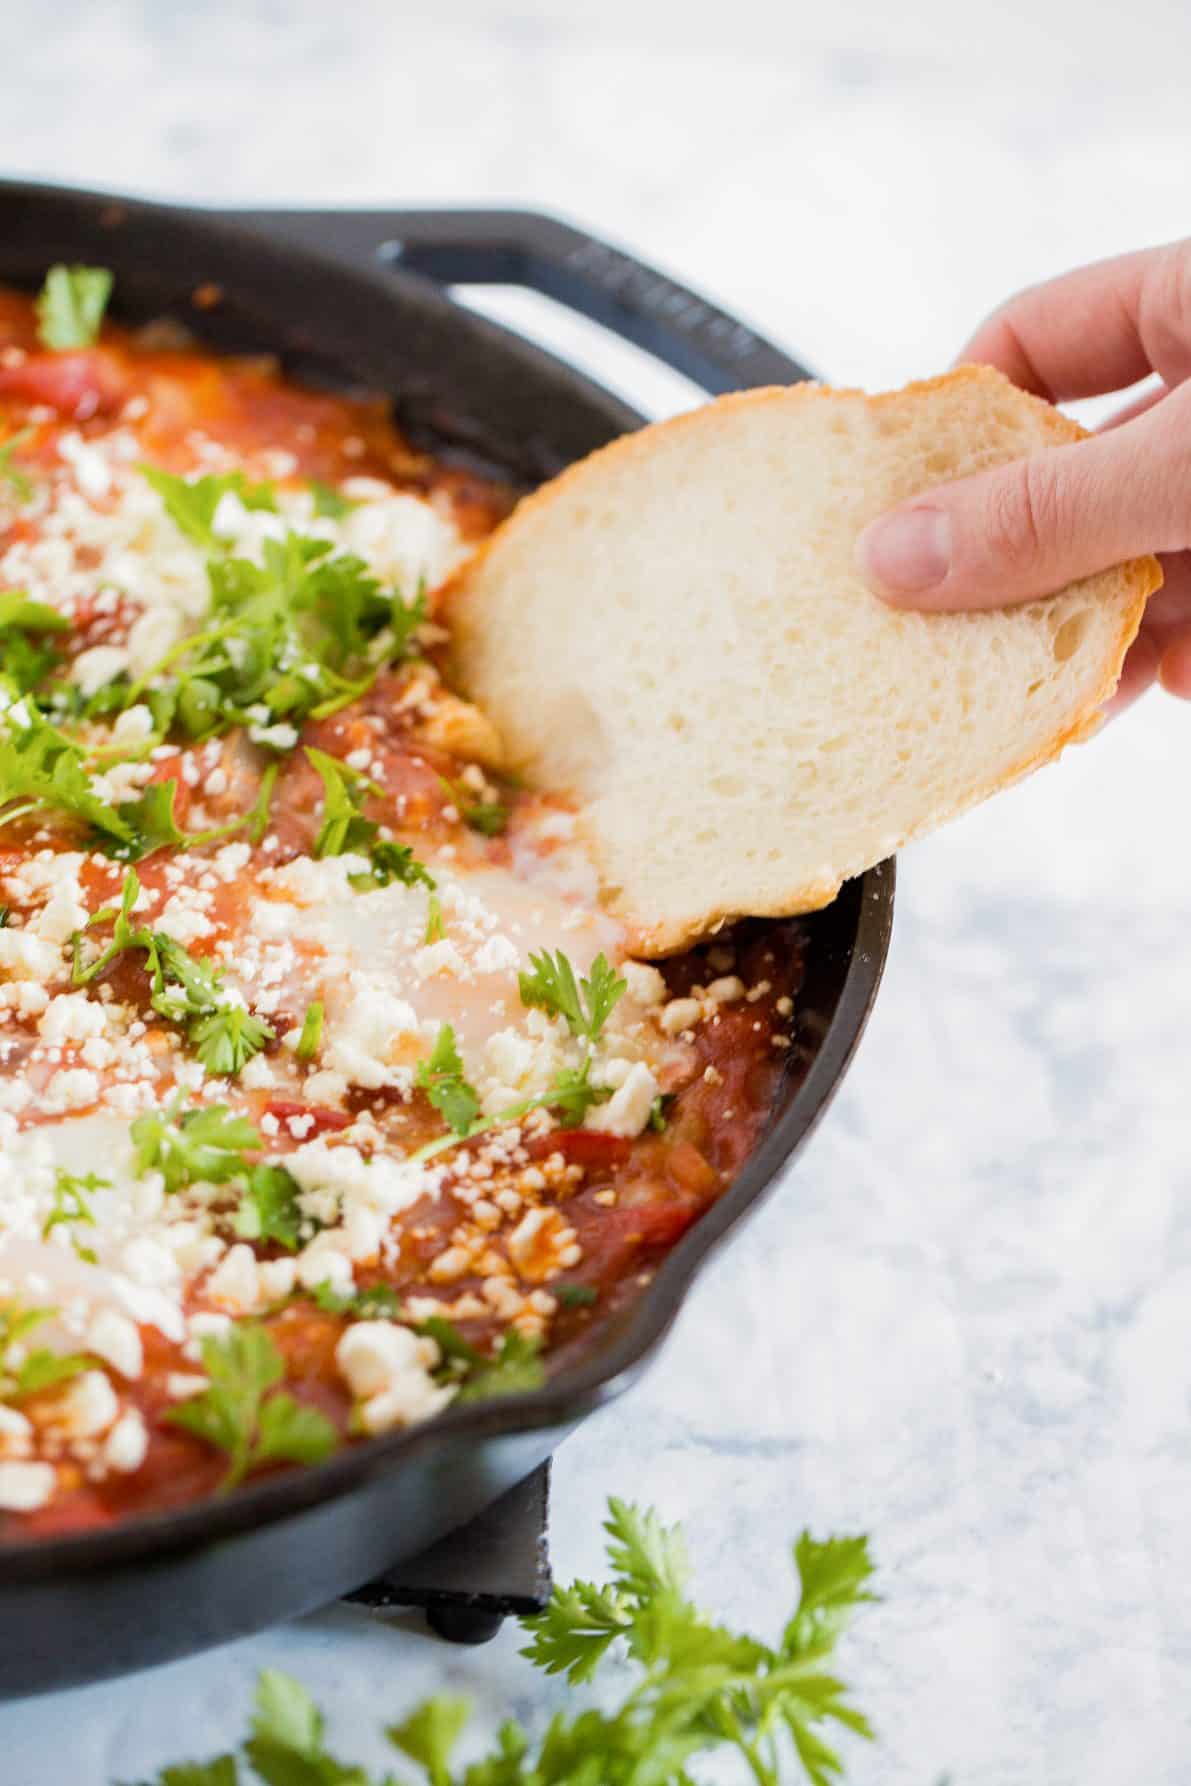 A cast iron skillet with shakshuka with feta and a hand dipping a piece of bread.